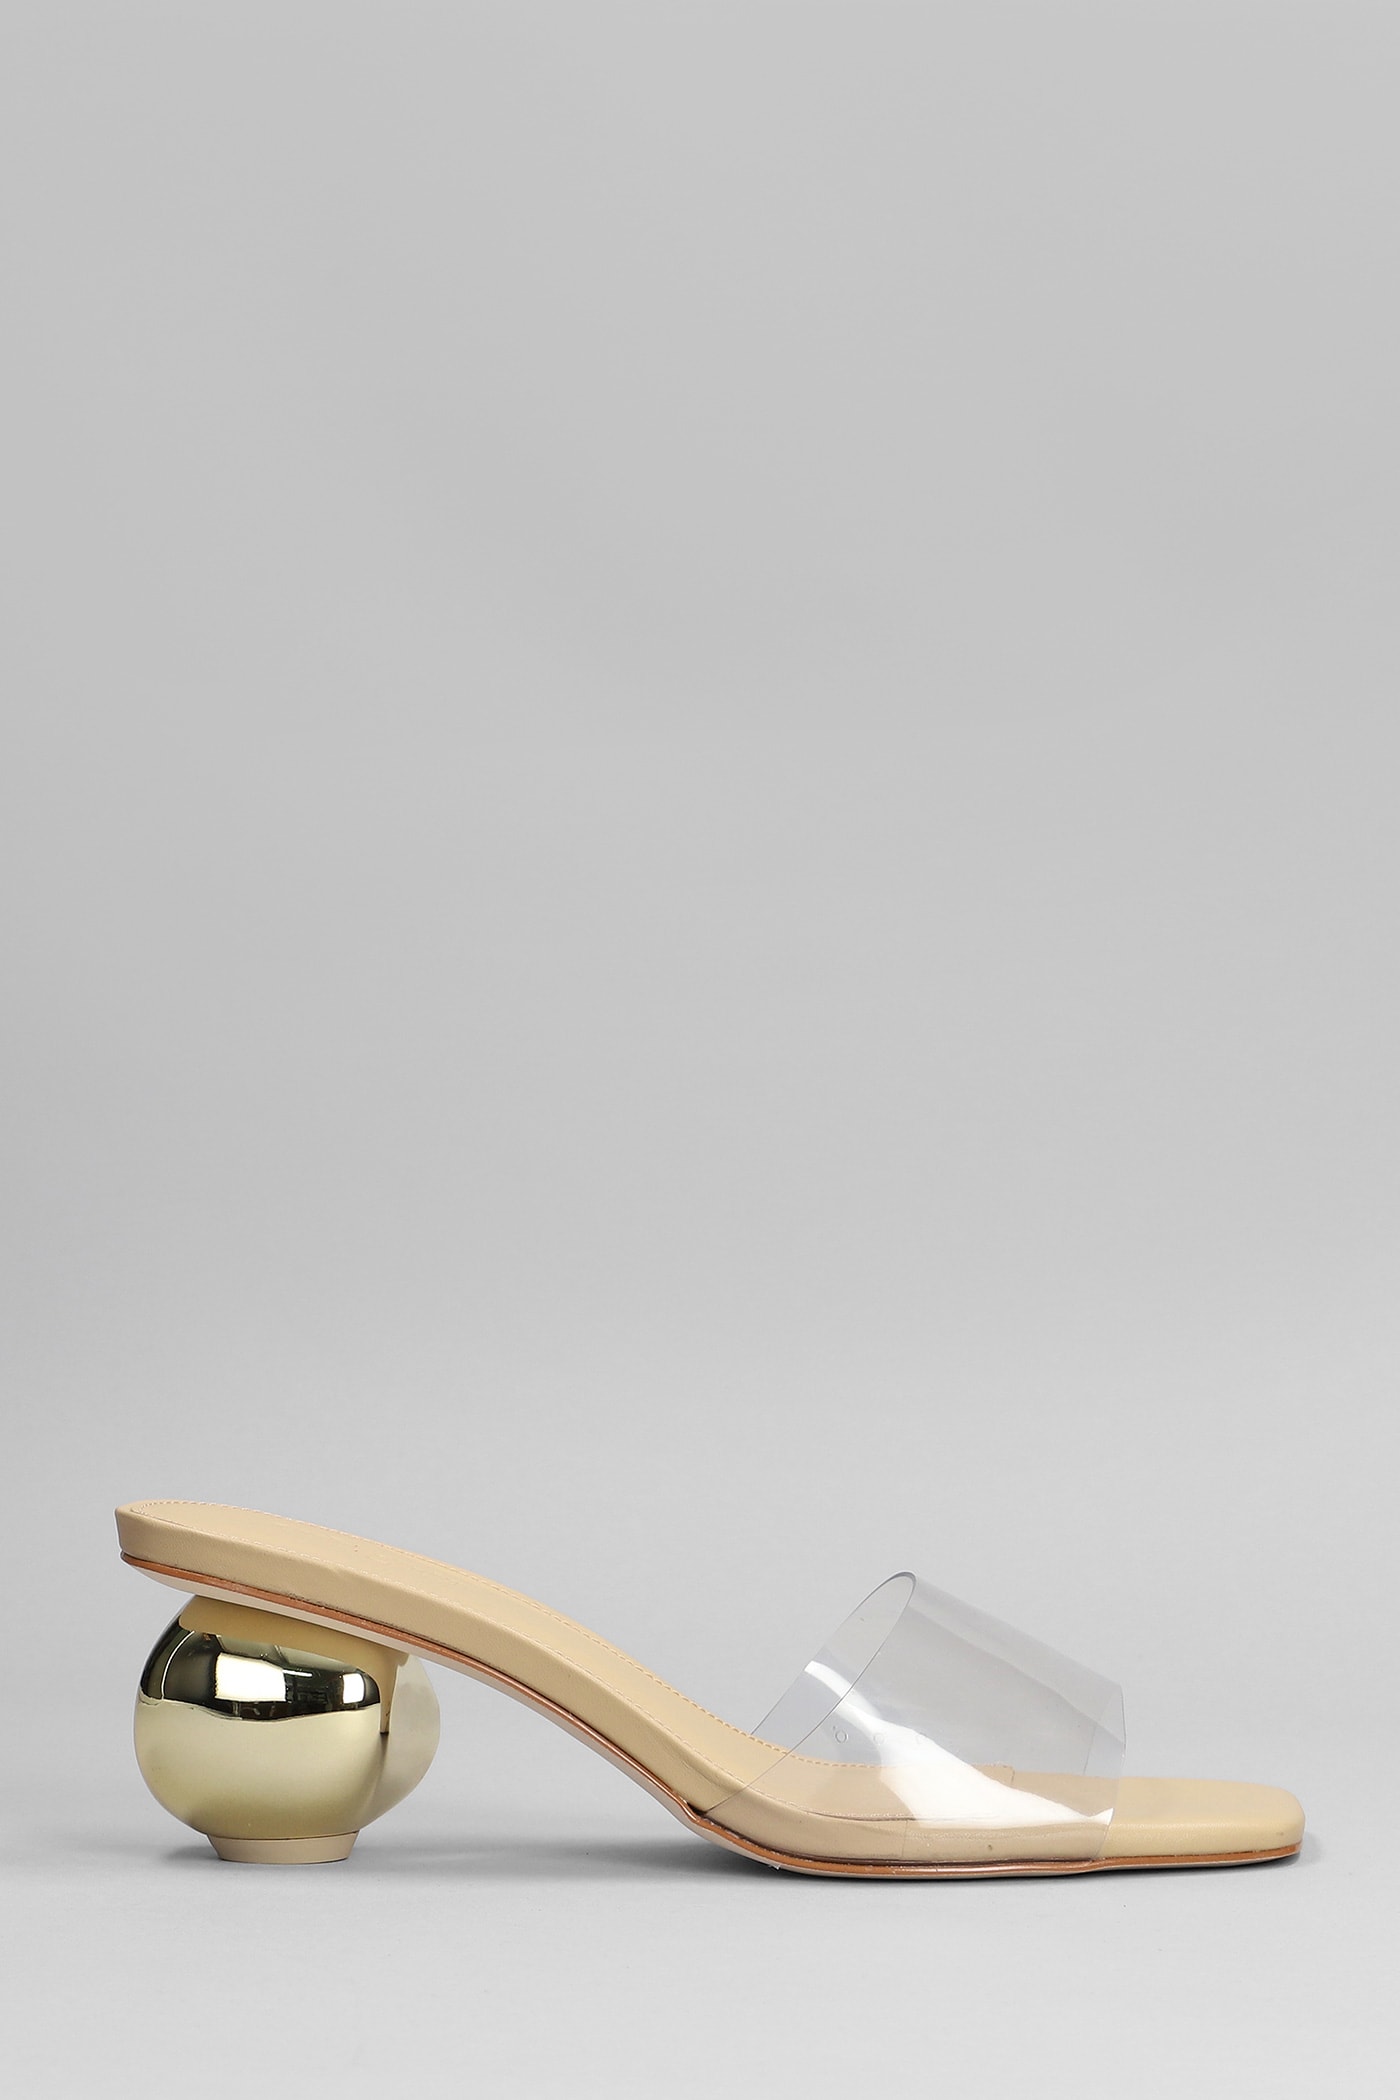 Cult Gaia Tyra Sandals In Transparent Leather